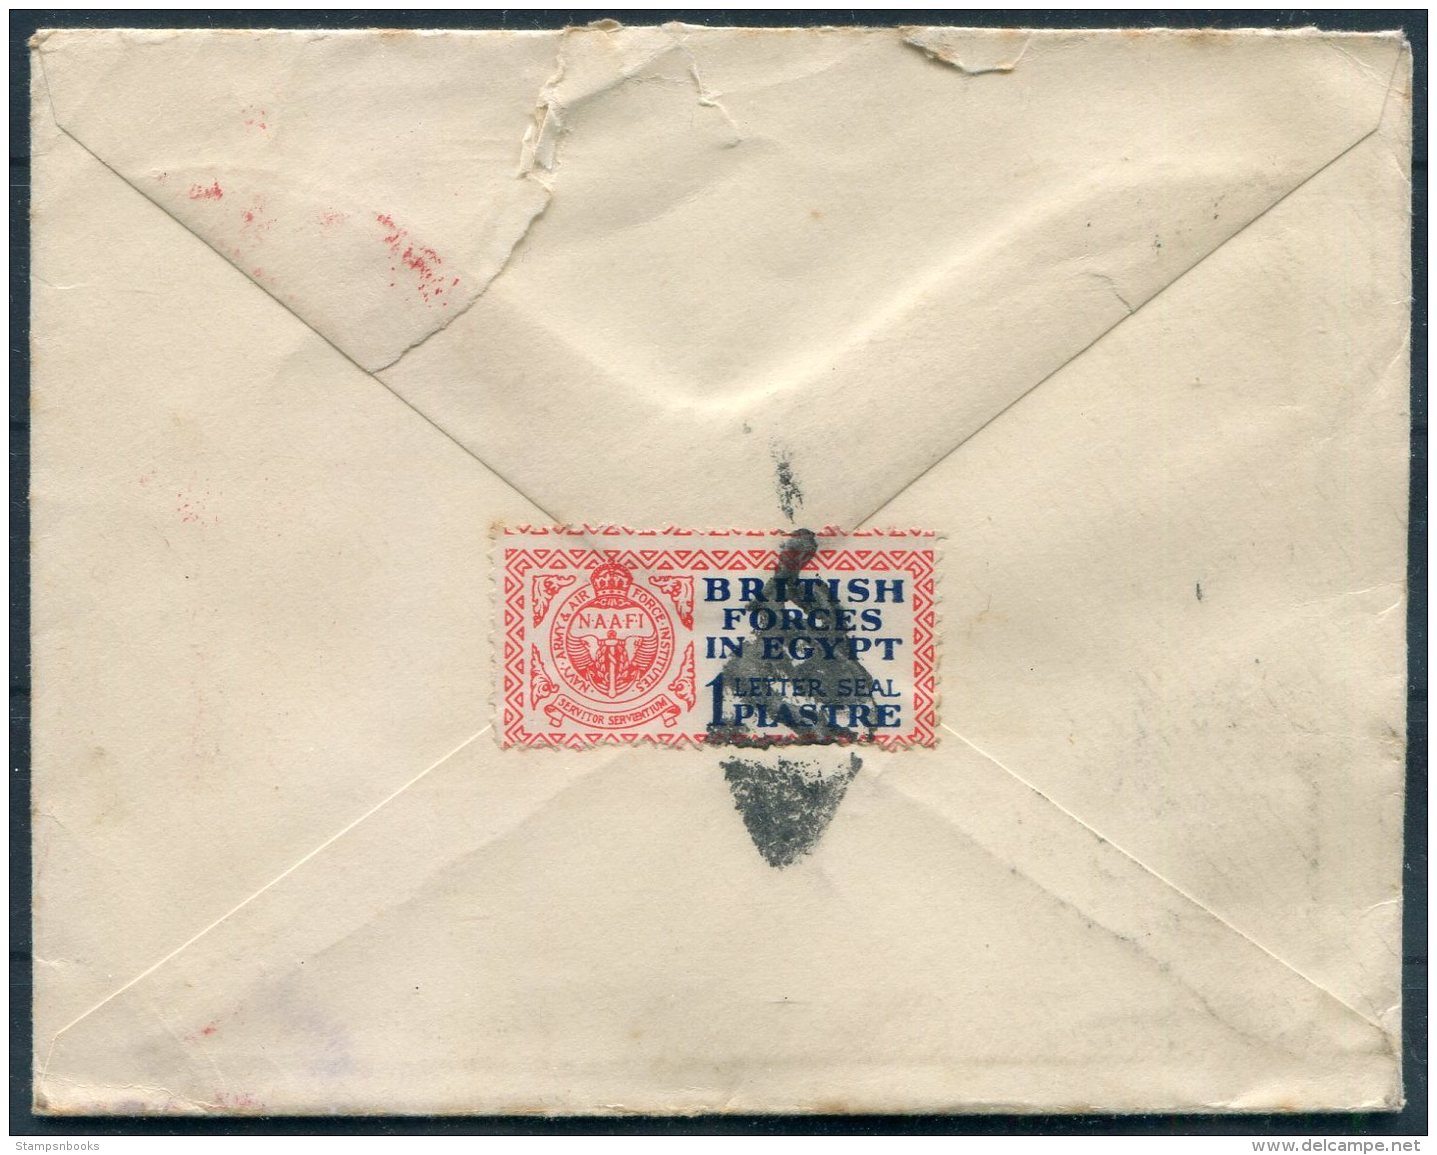 1934 Egypt Postage Prepaid M.P.O. Cairo Military Cover - Cambridge England. British Forces NAAFI 1 Piastre Letter Seal - Covers & Documents